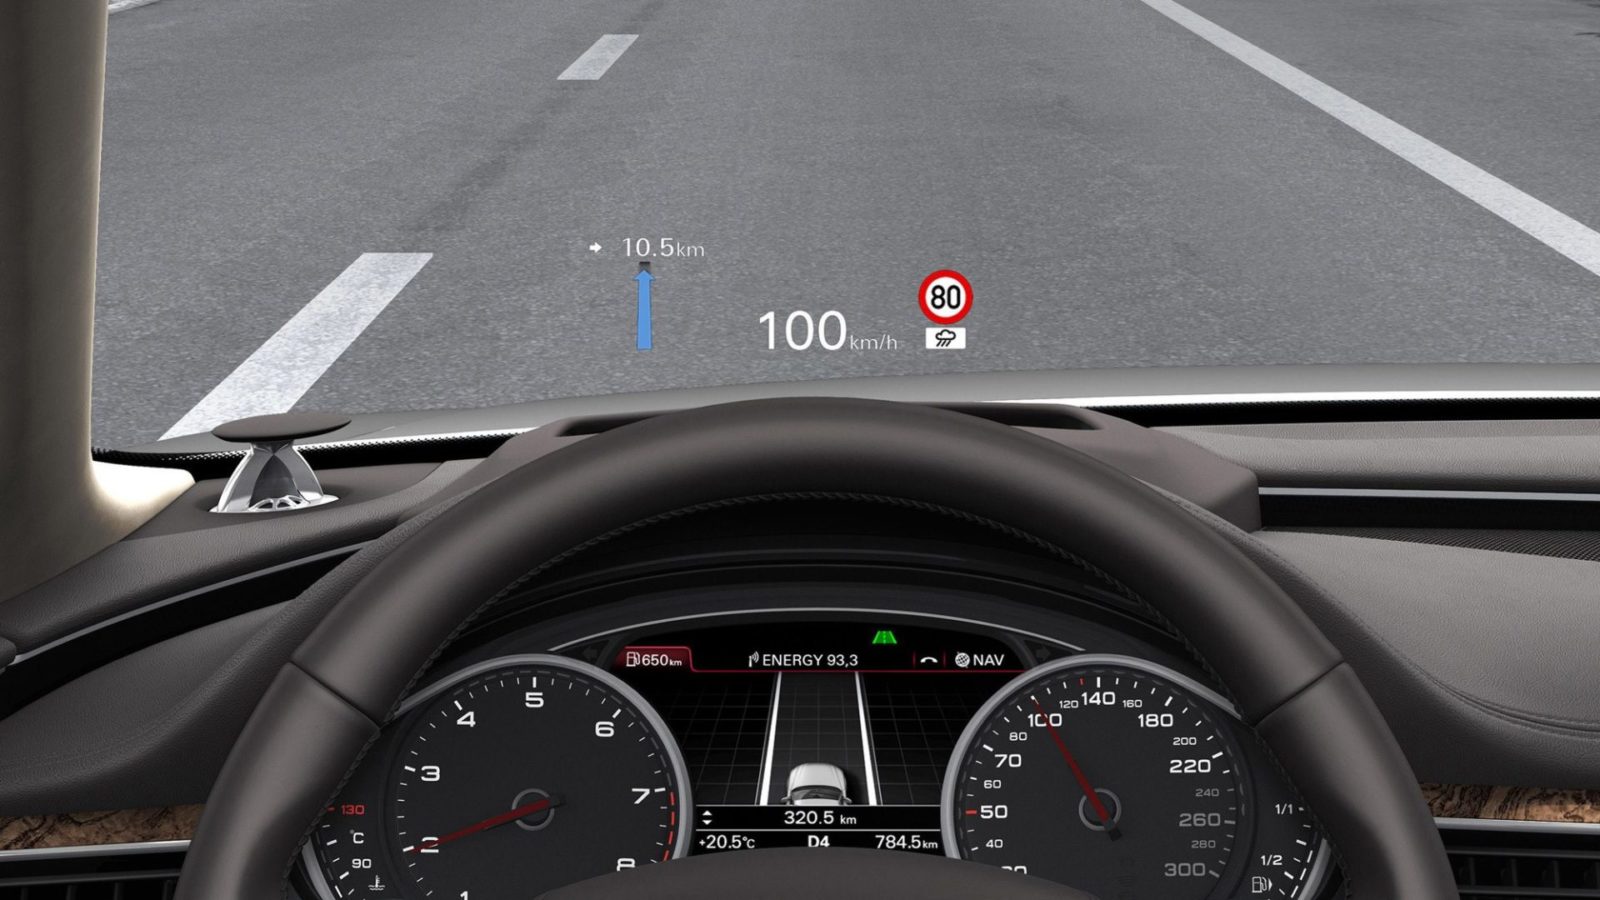 Apple Car will use AR for HUD to warn drivers